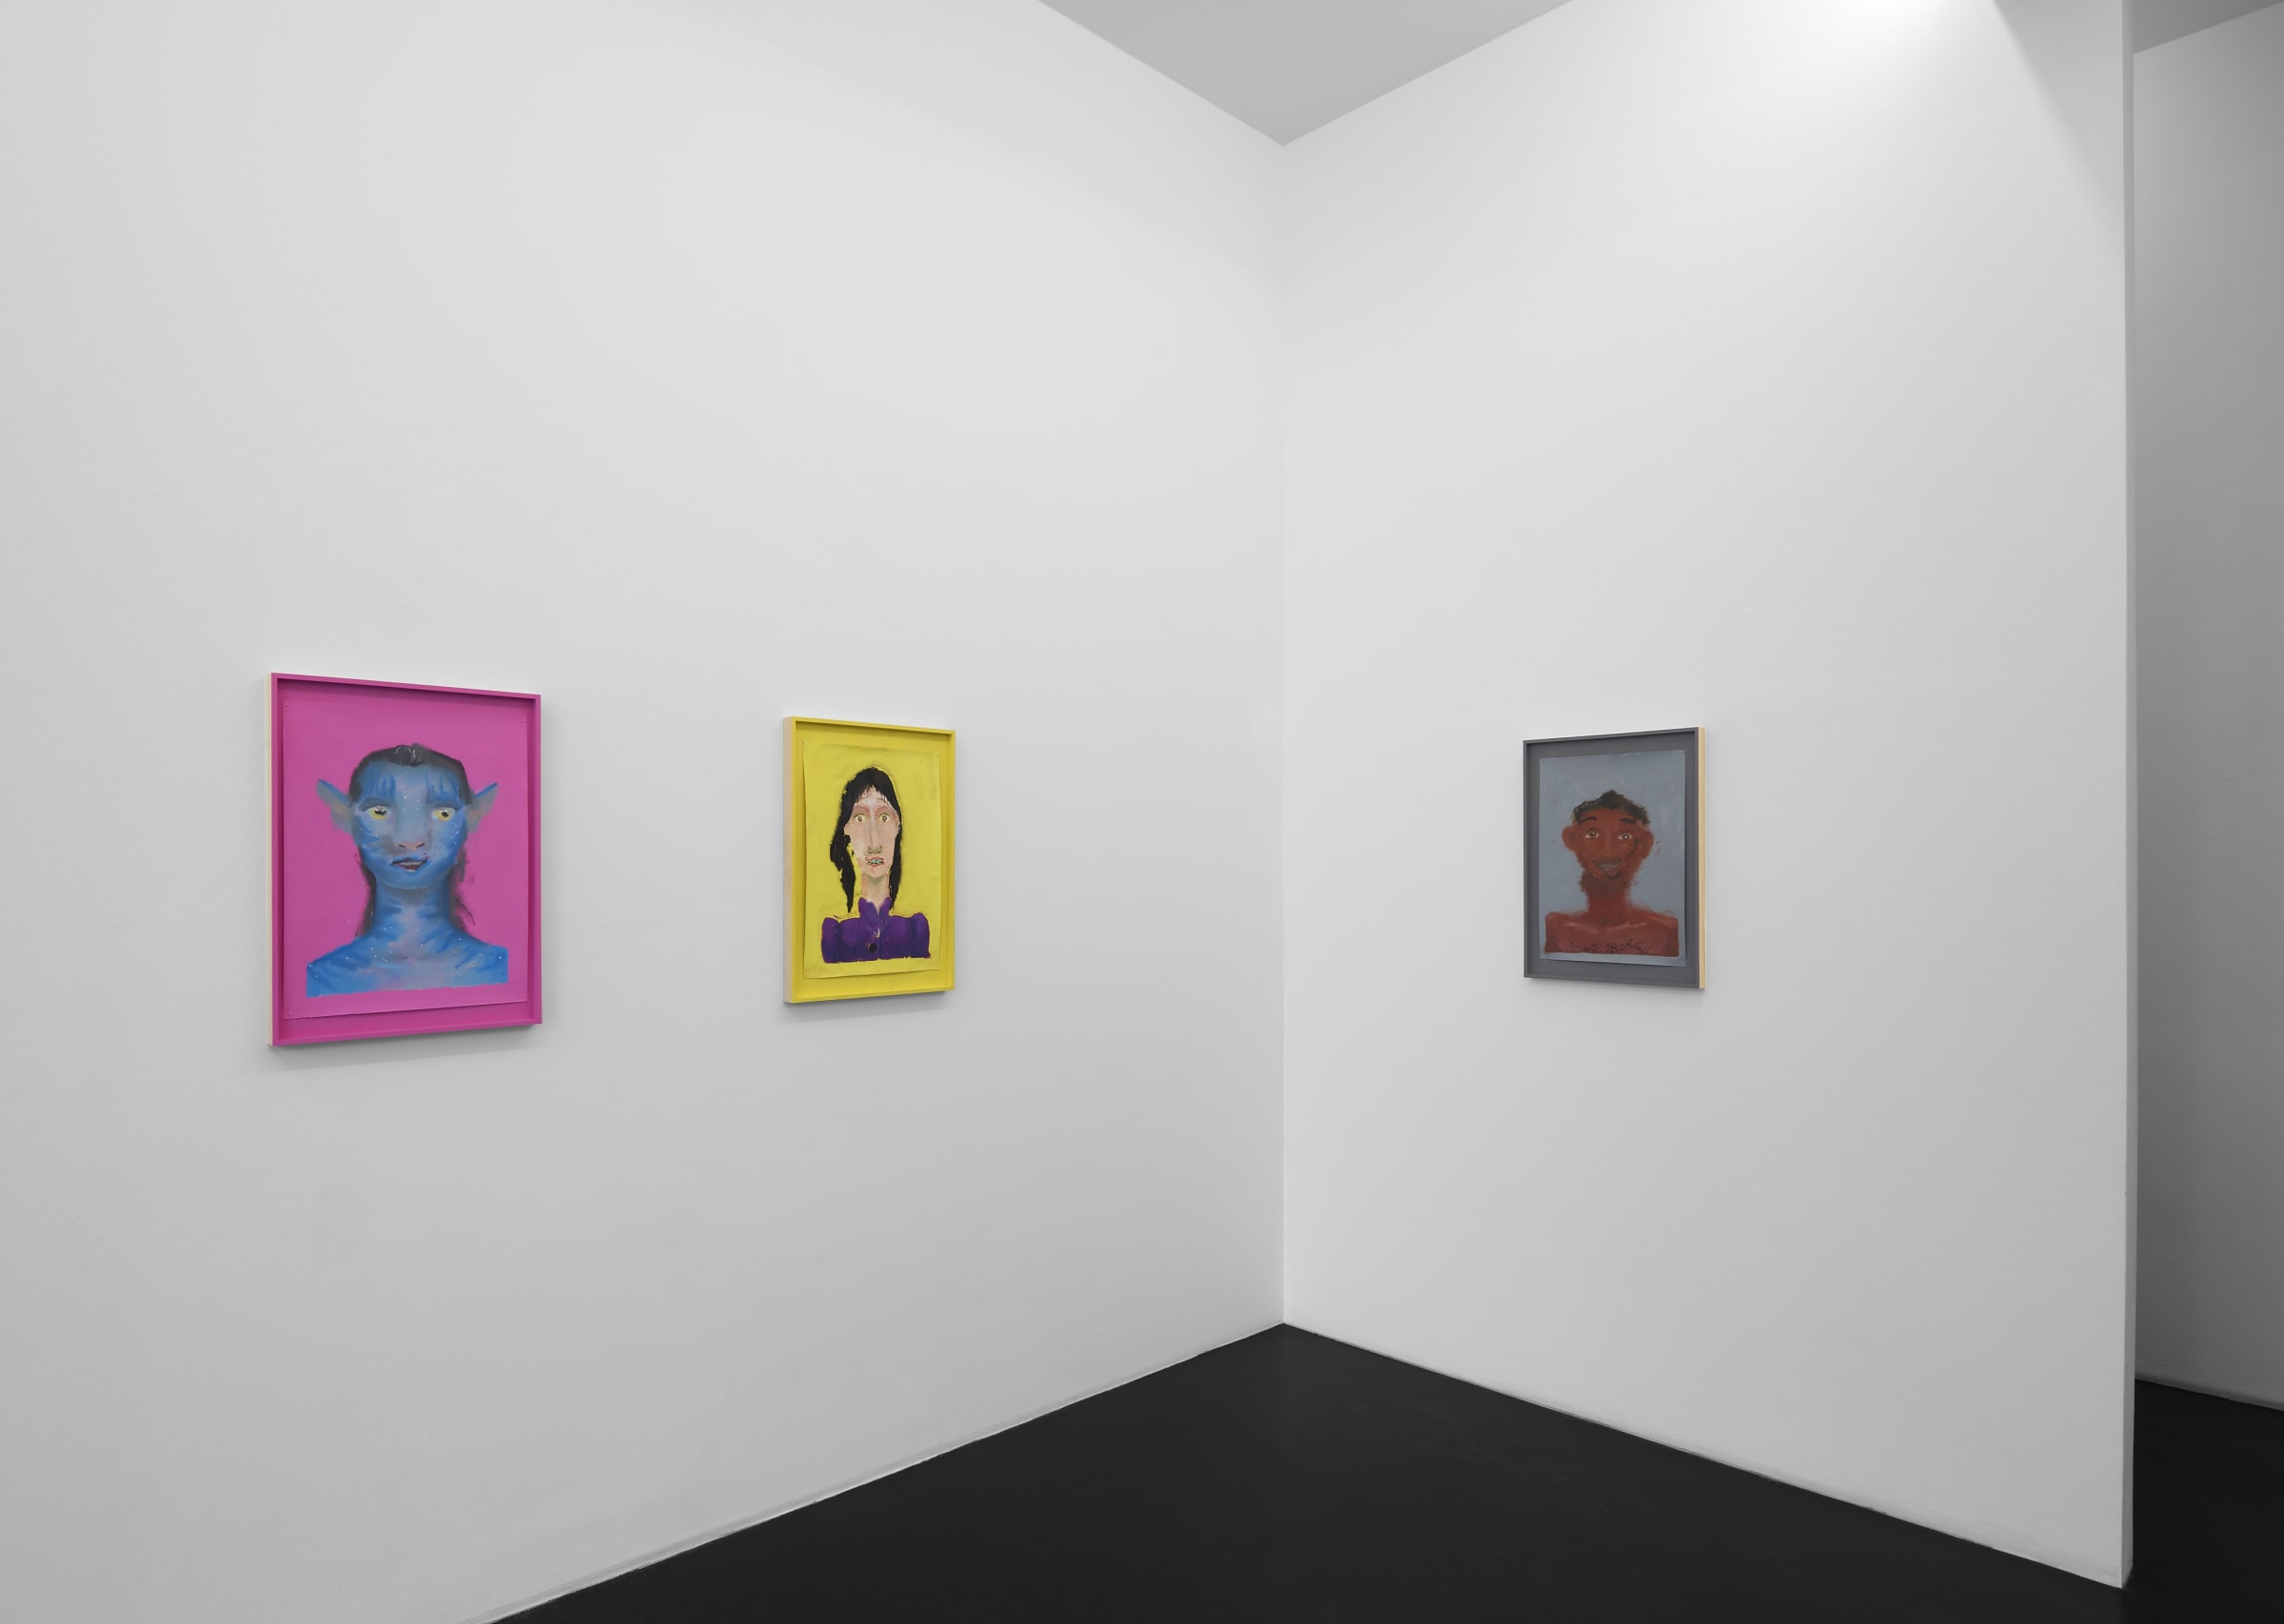 Manuel Solano Portraits Installation View September 13 – October 25, 2019 Peres Projects, Berlin Photographed by: Matthias Kolb